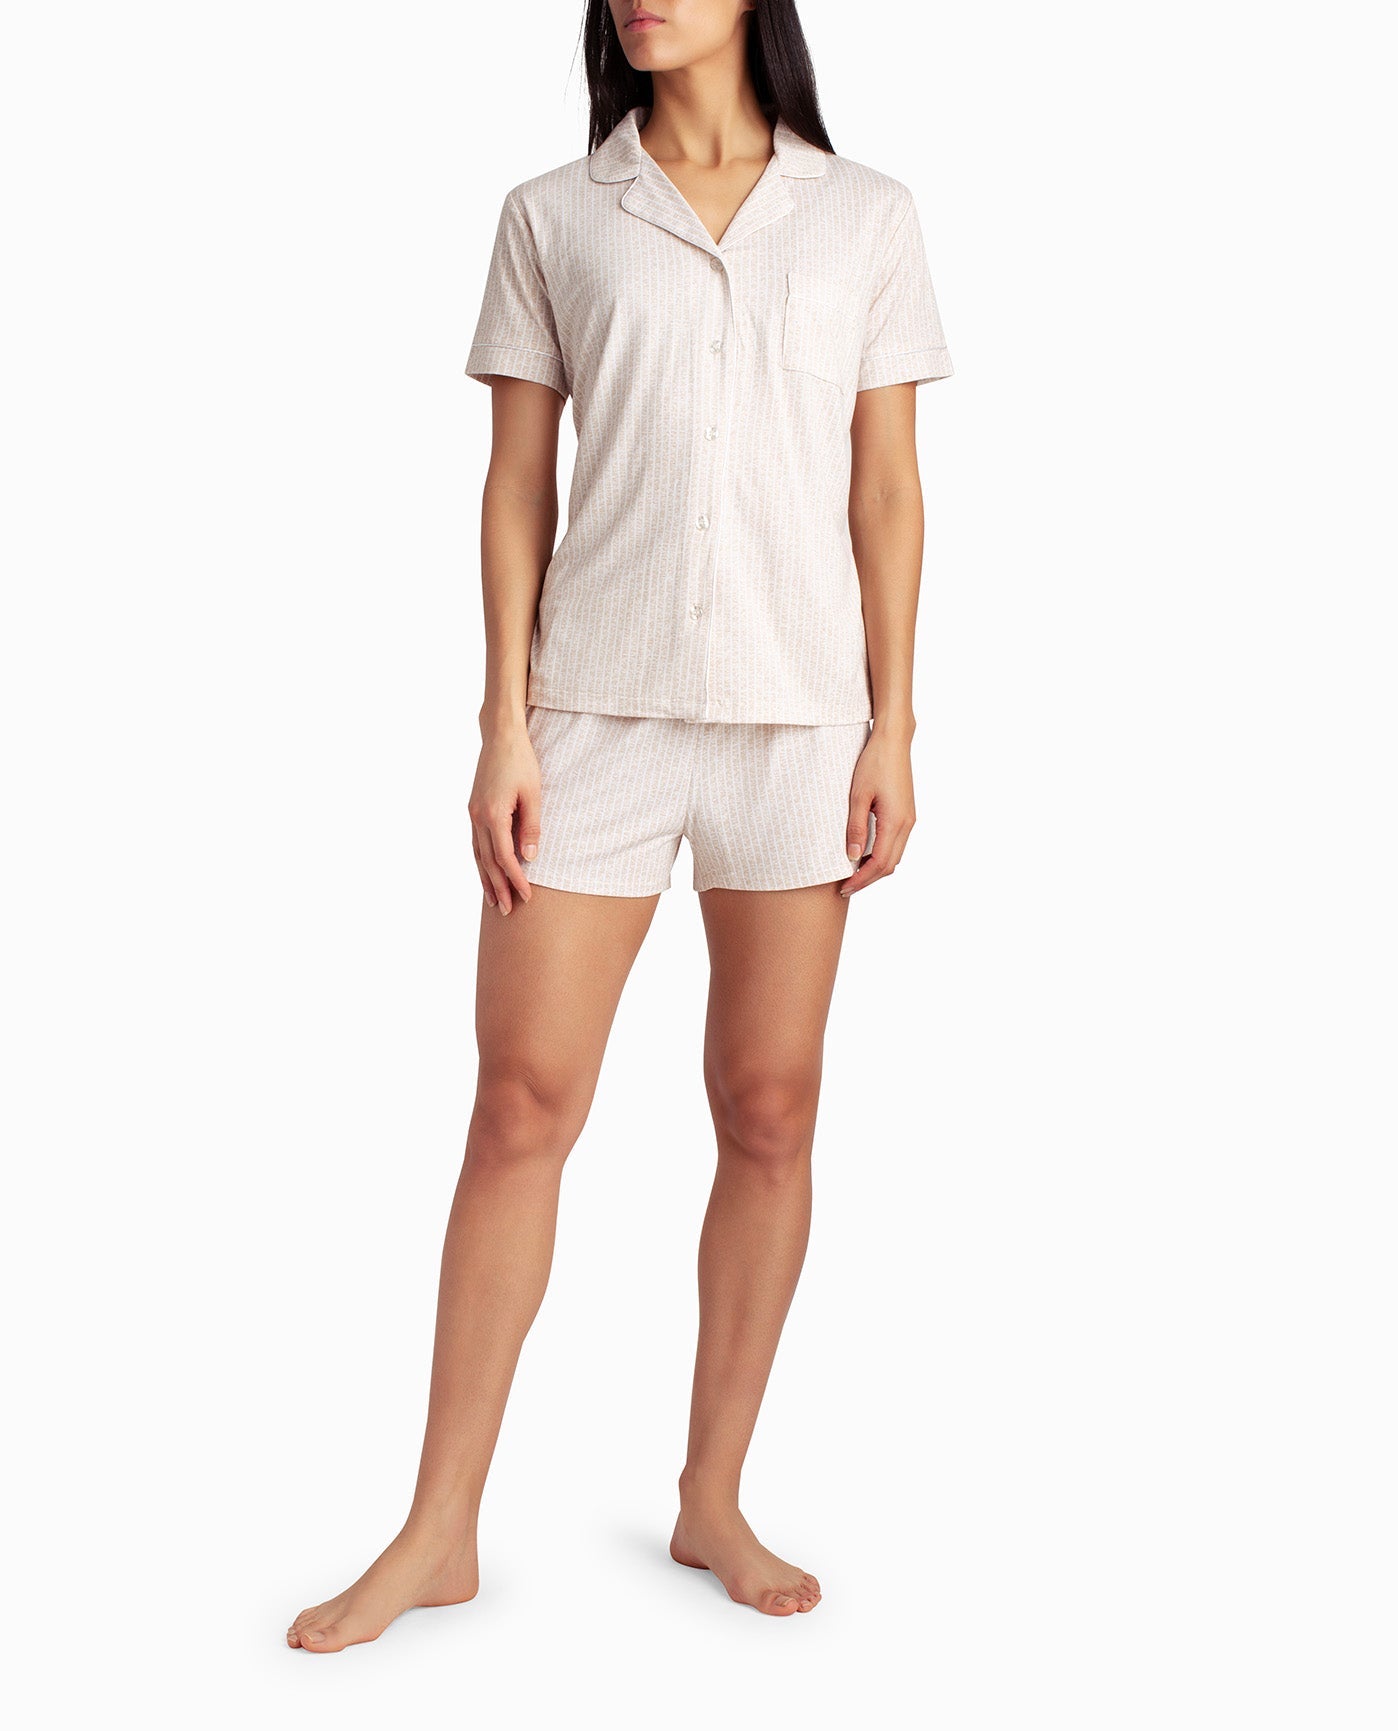 FRONT OF PEACHED JERSEY SHIRT AND SHORT TWO-PIECE SLEEPWEAR SET | Oatmeal Stripe